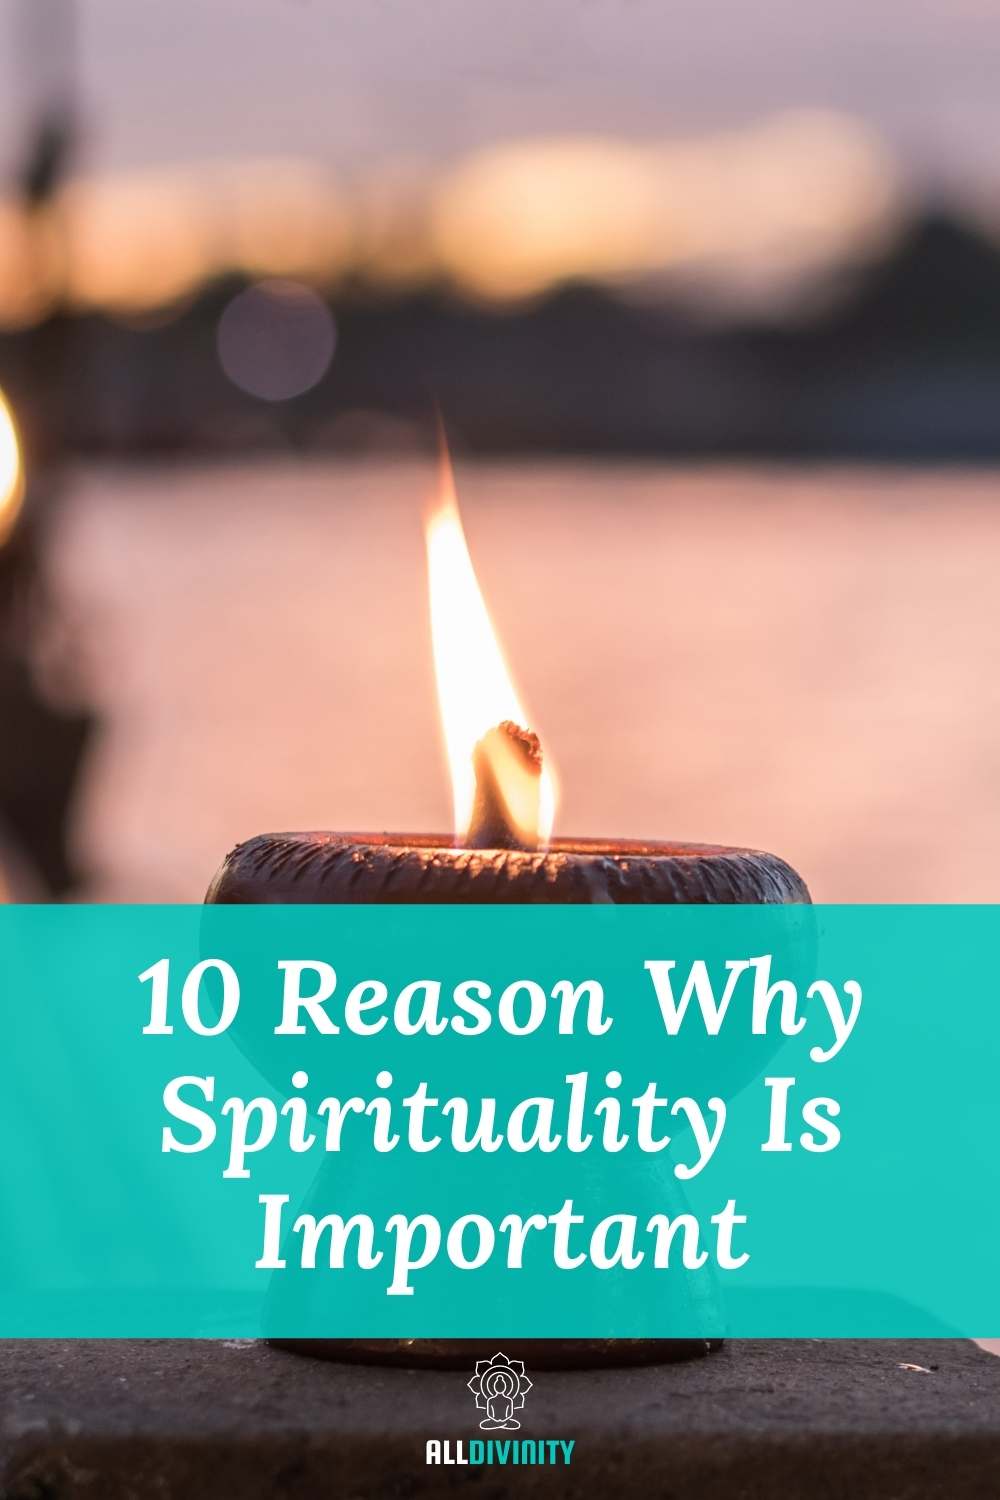 10 Reason Why Spirituality Is Important - All Divinity